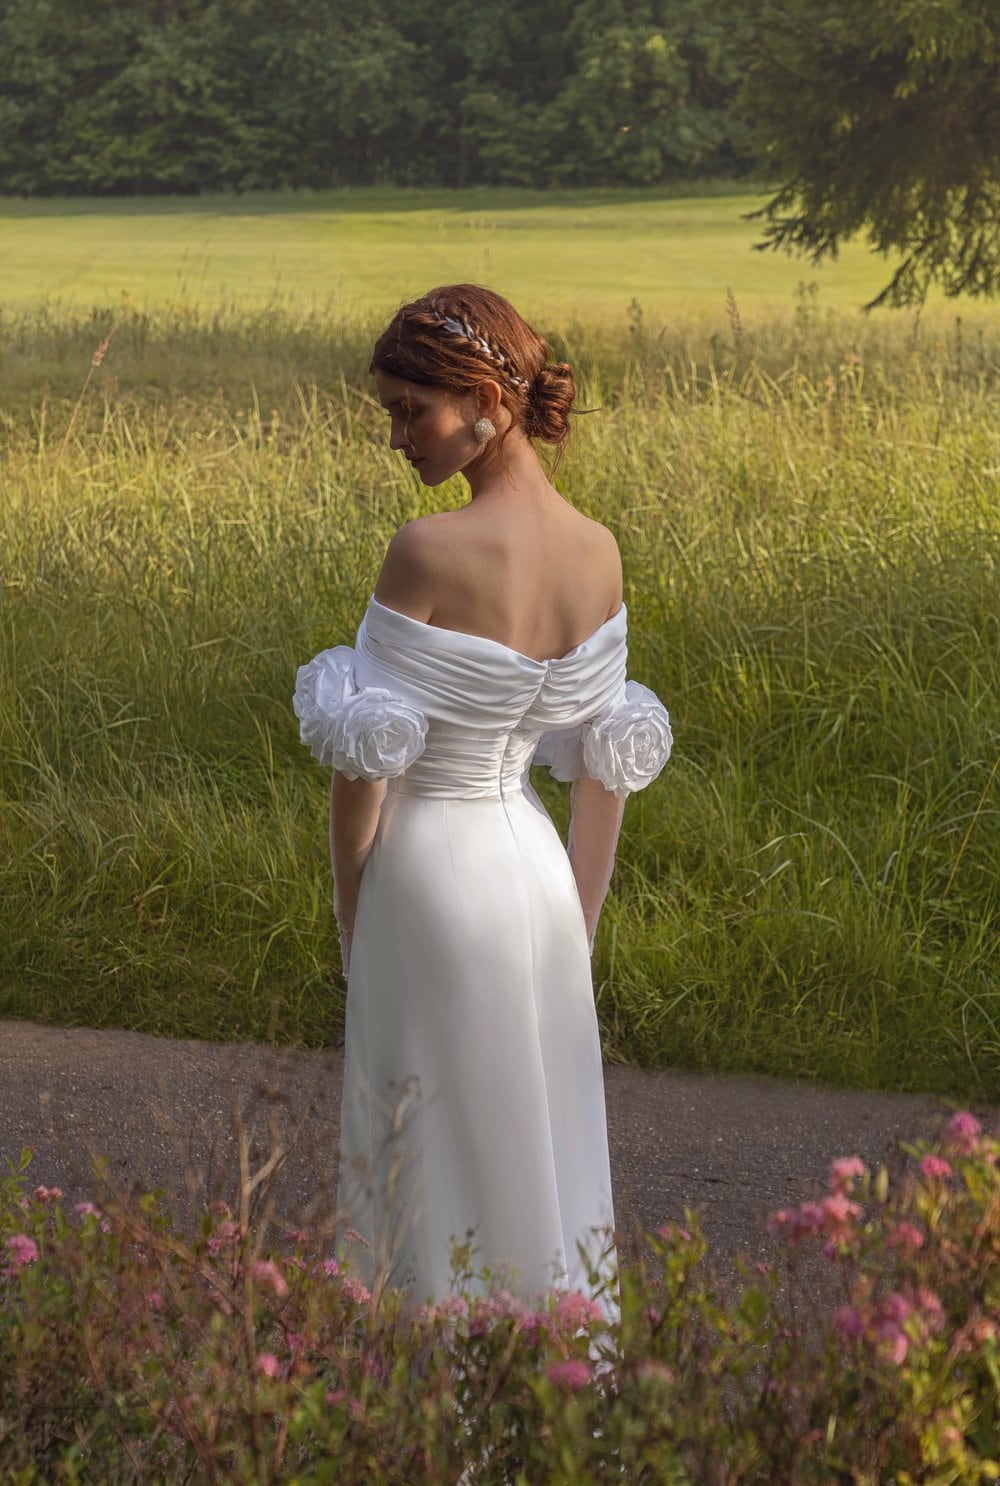 Classic Simple Sheath Style Off the Shoulder Open Back Wedding Dress Bridal Gown Minimalist with Train Unique Design Sweetheart Neckline